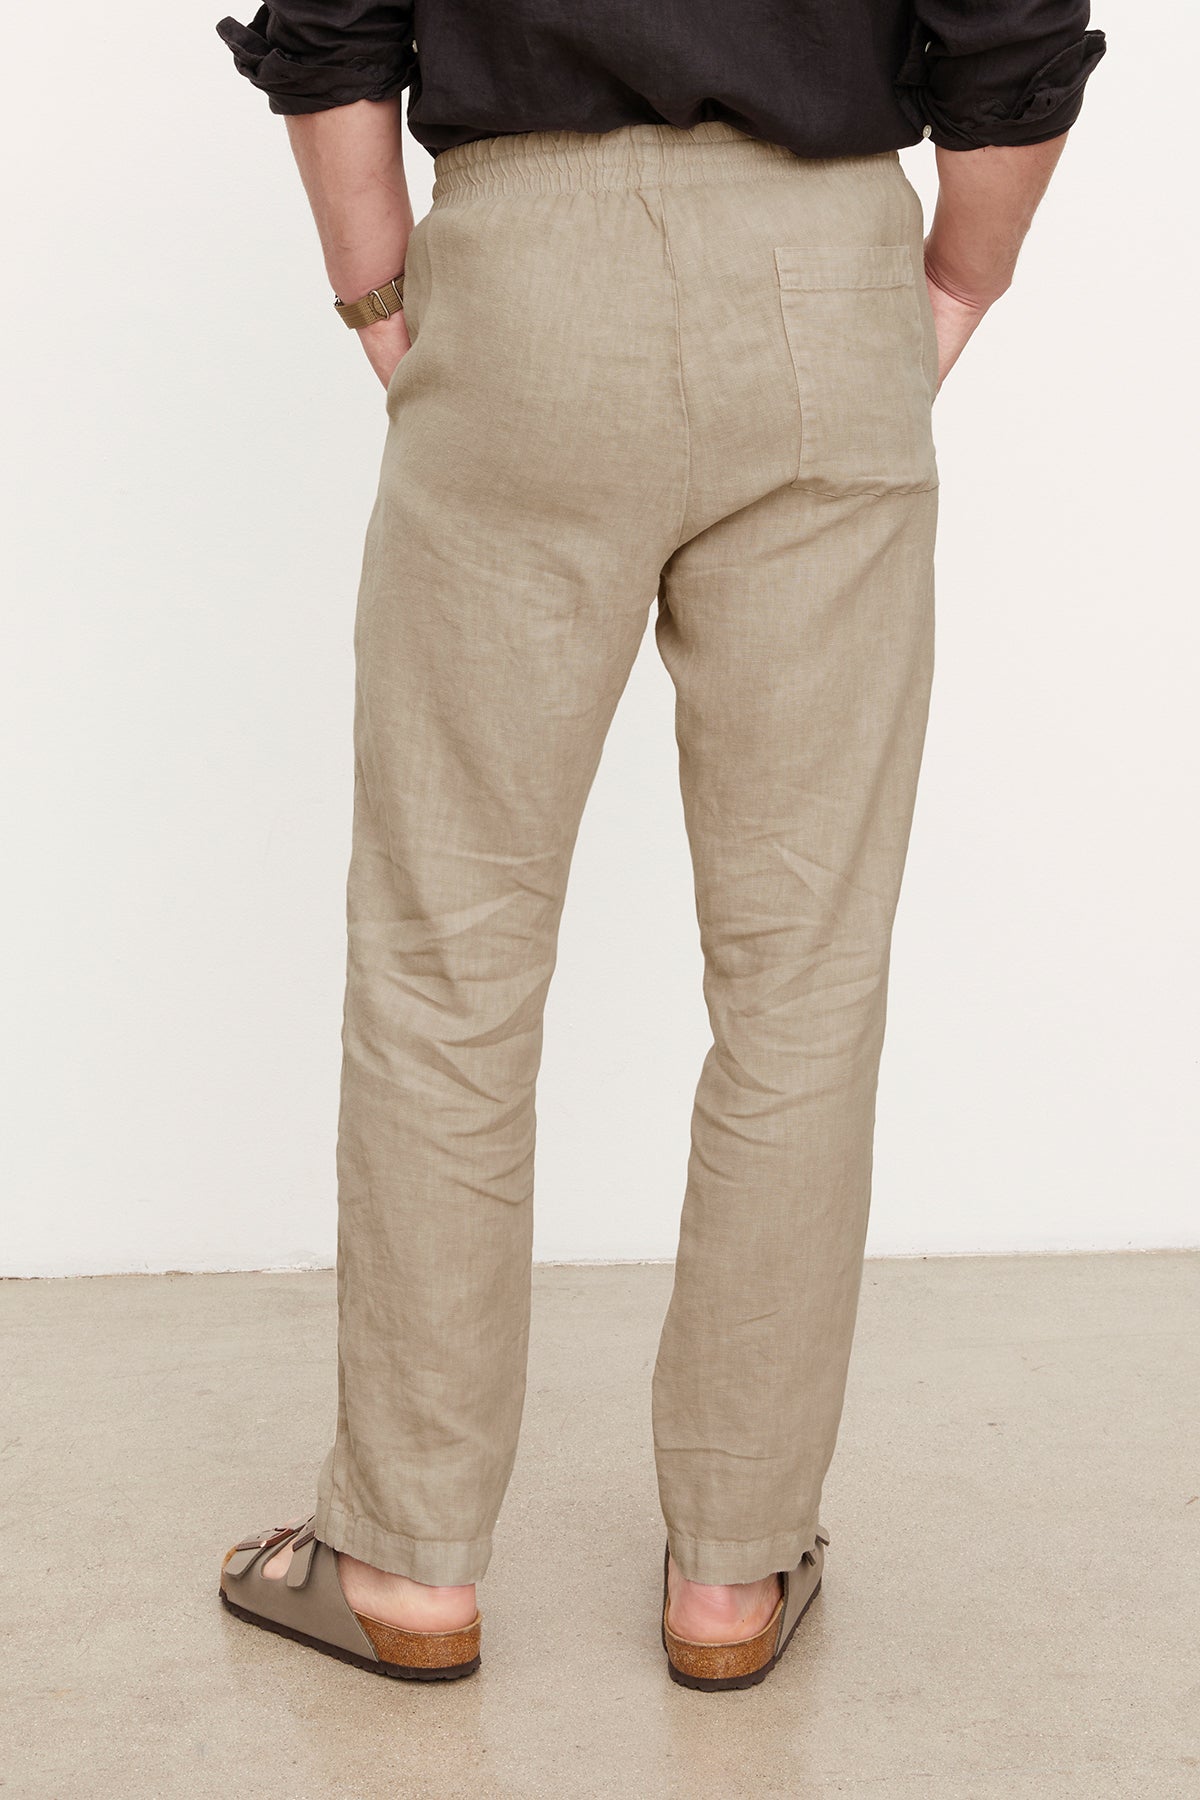 Rear view of a person standing in Velvet by Graham & Spencer's Phelan Linen Pant and brown sandals against a white background.-36532720238785